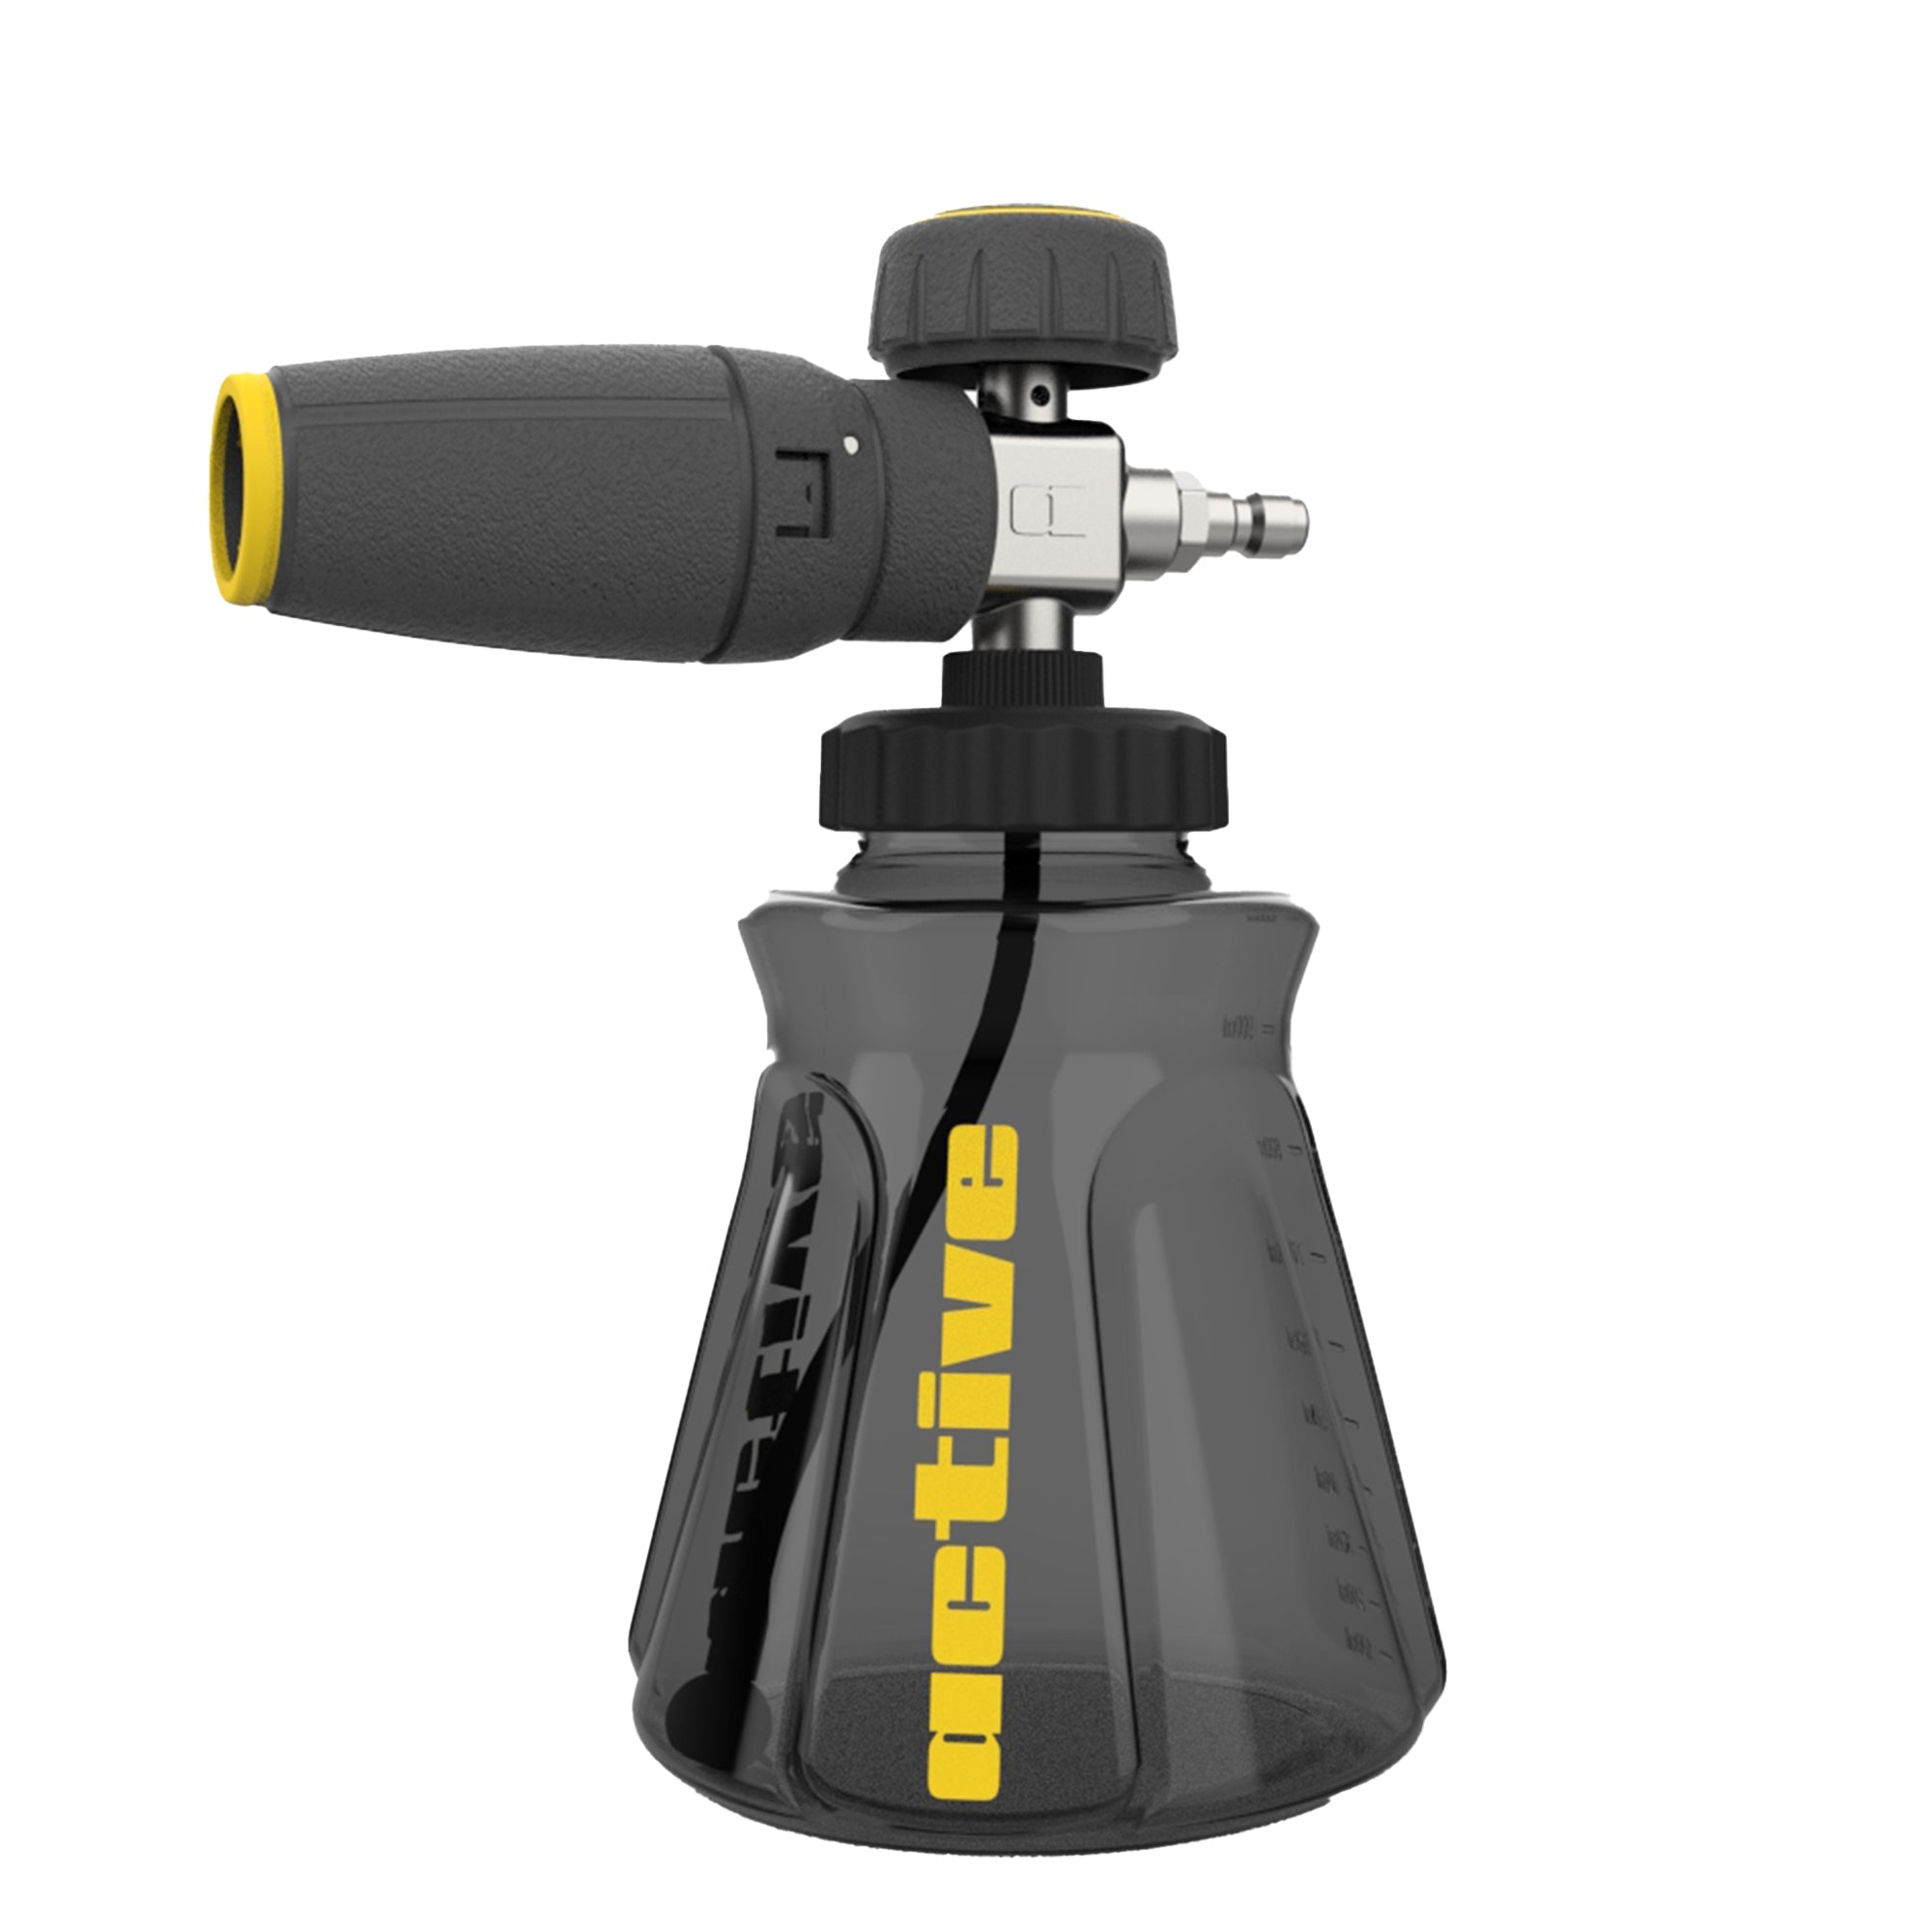 A black and yellow Active™ Premium Pressure Washer Foam Cannon hand-held gardening sprayer with measurement indicators on the translucent container and an adjustable nozzle.